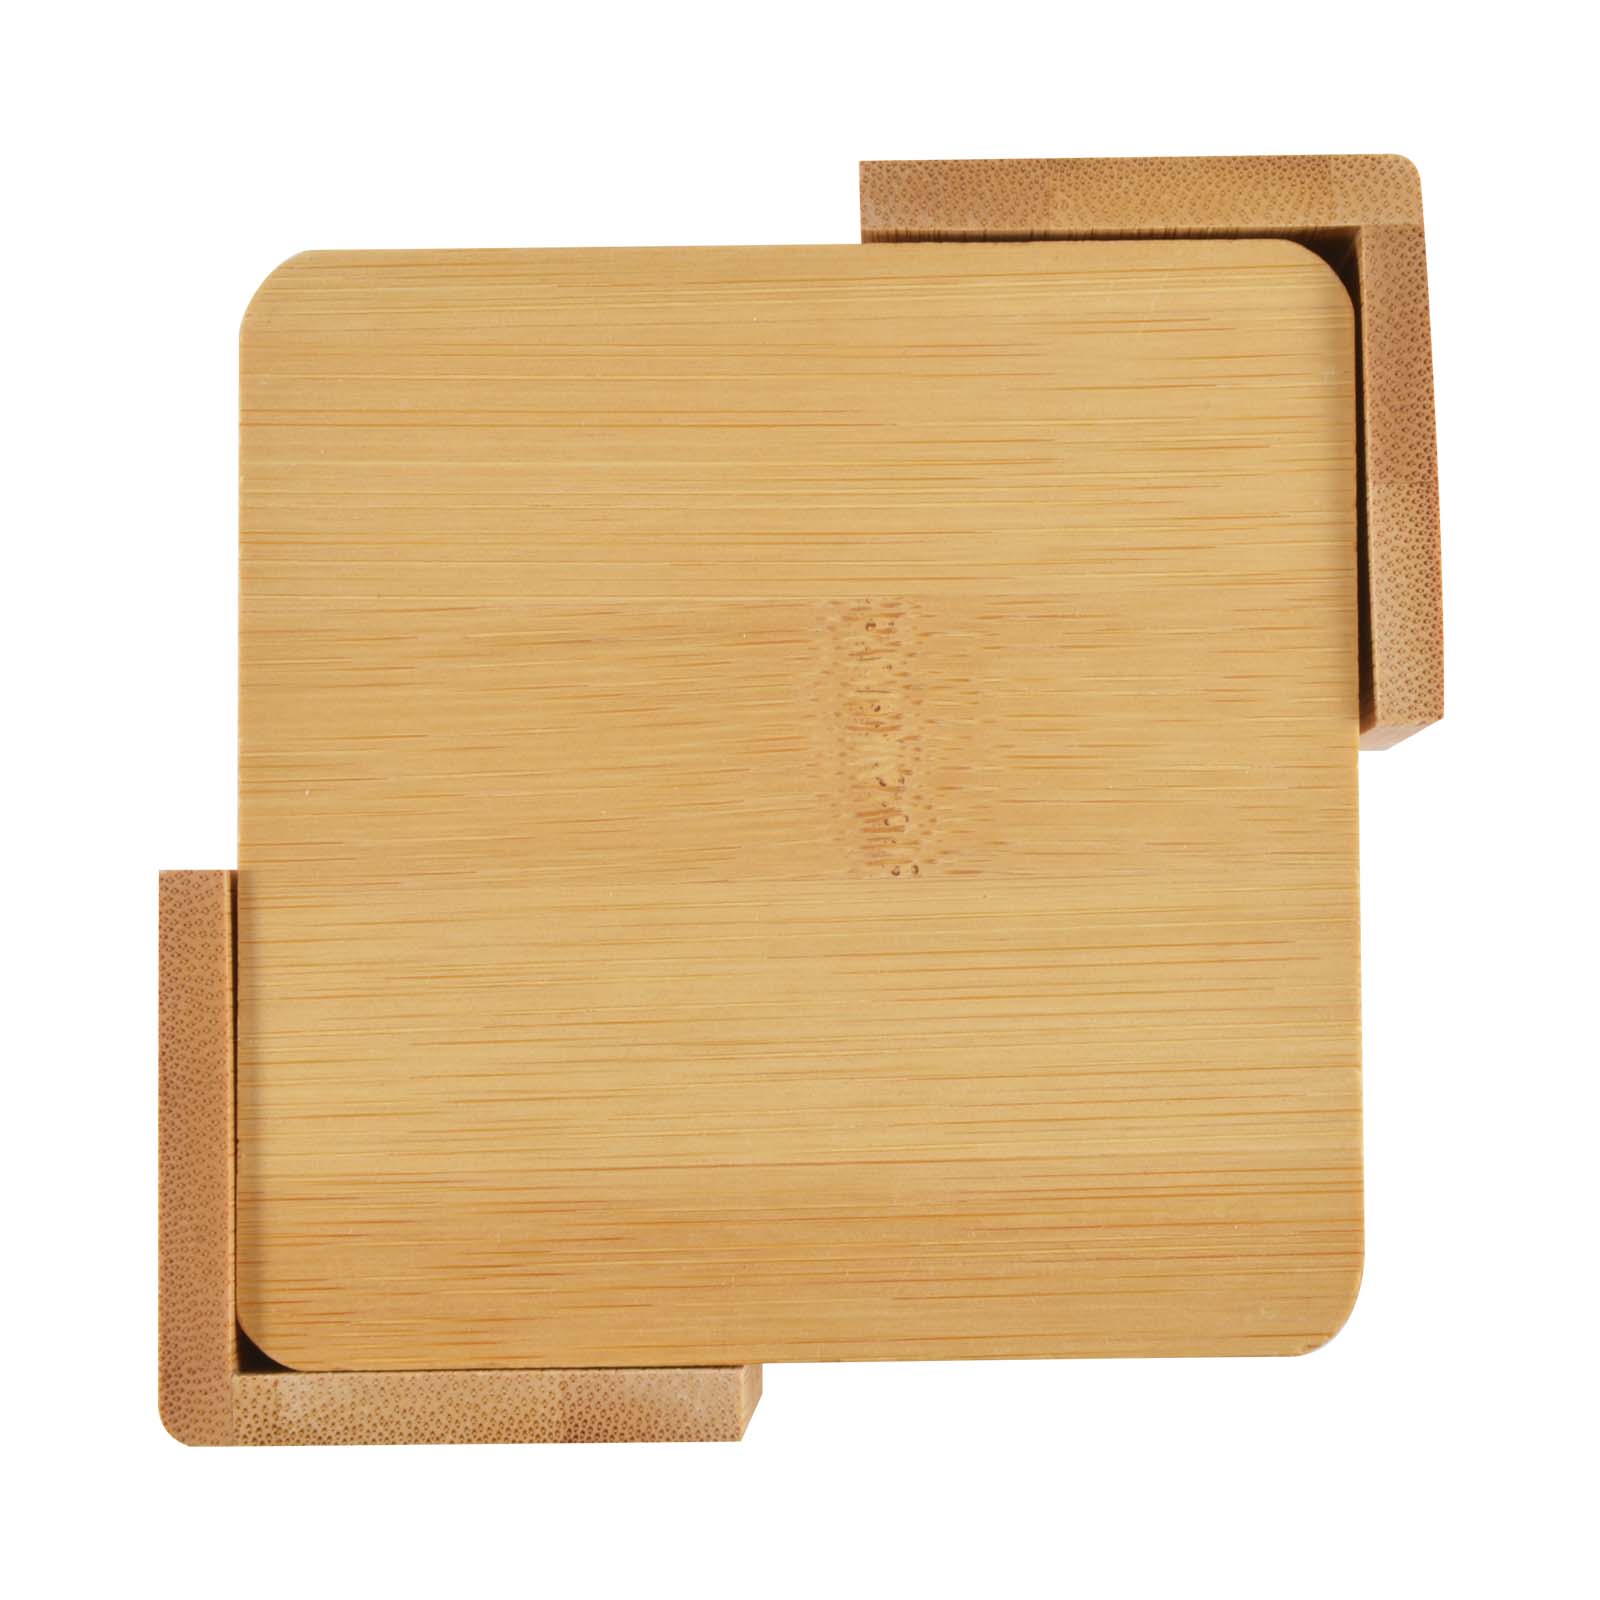 Drinkware Accessories Tropic Bamboo Coasters Set of 6 6